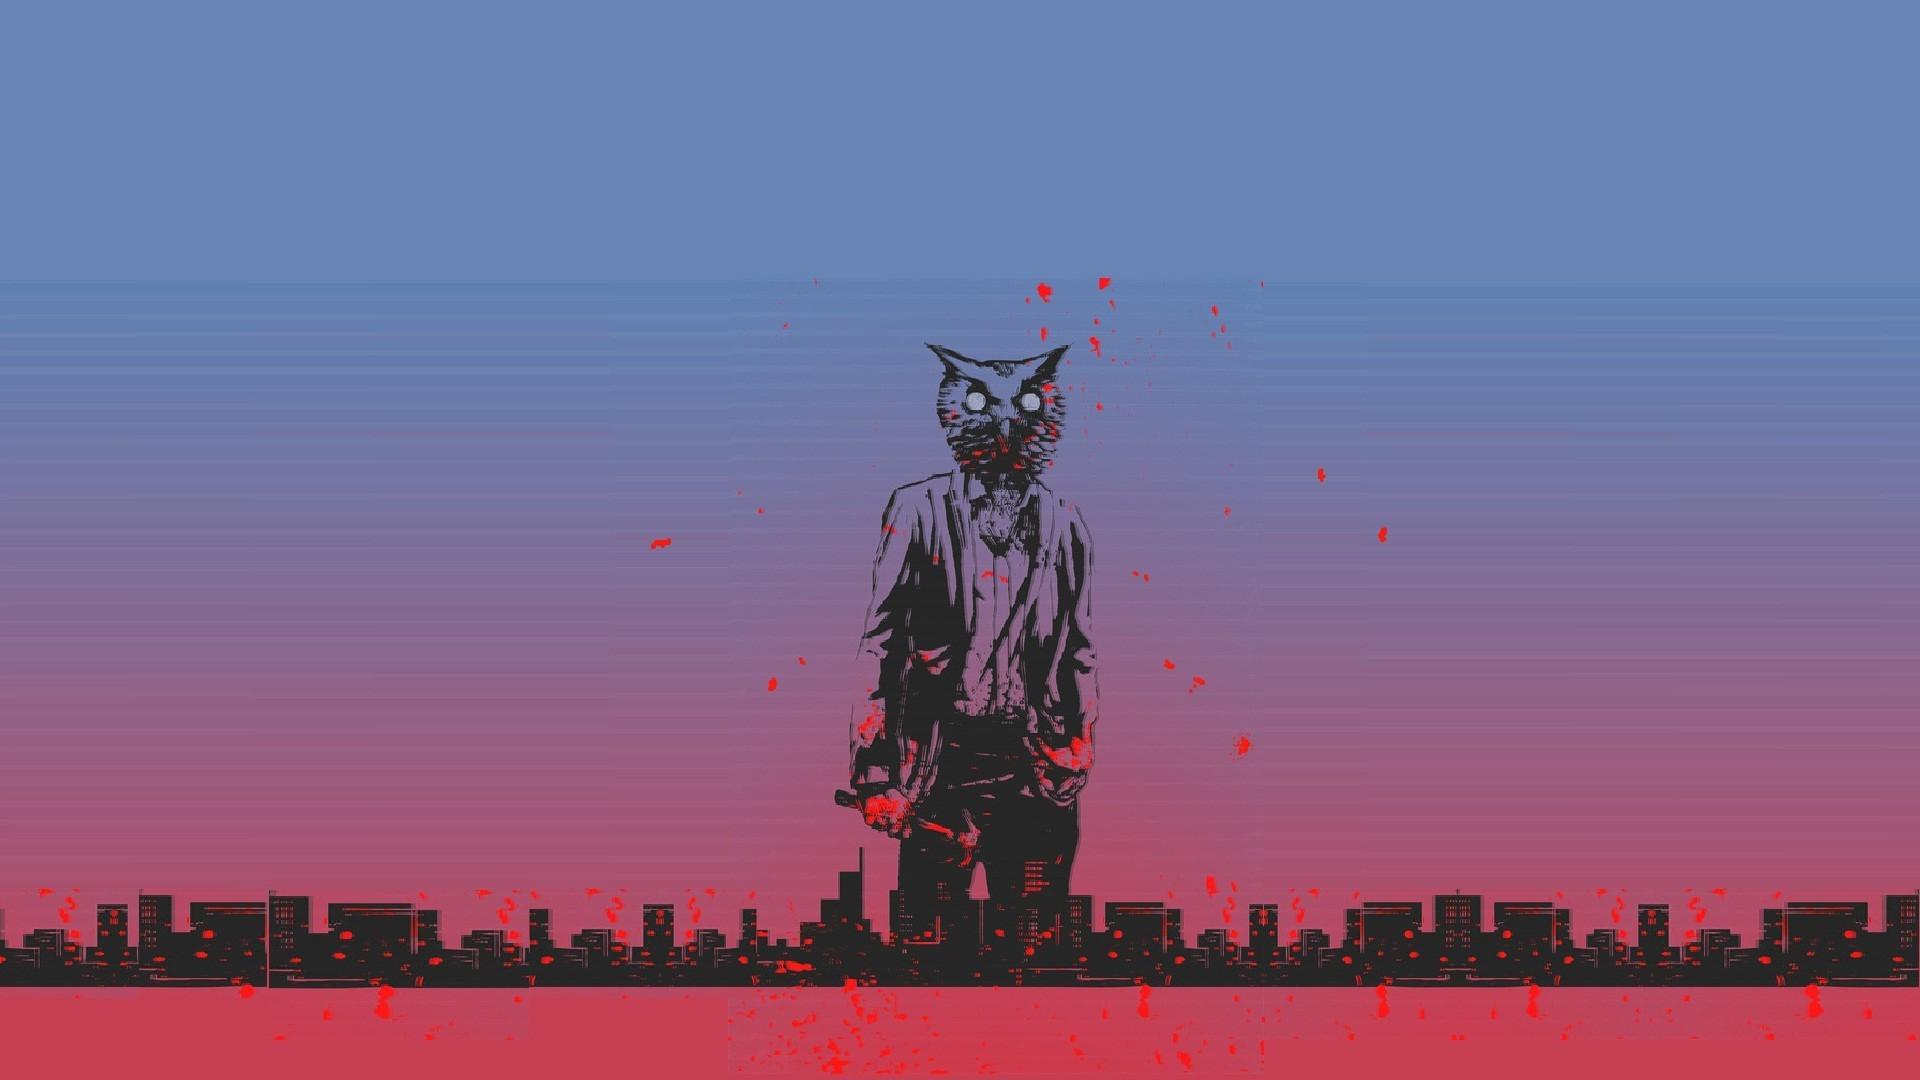 8 Bit Wallpapers 81 pictures